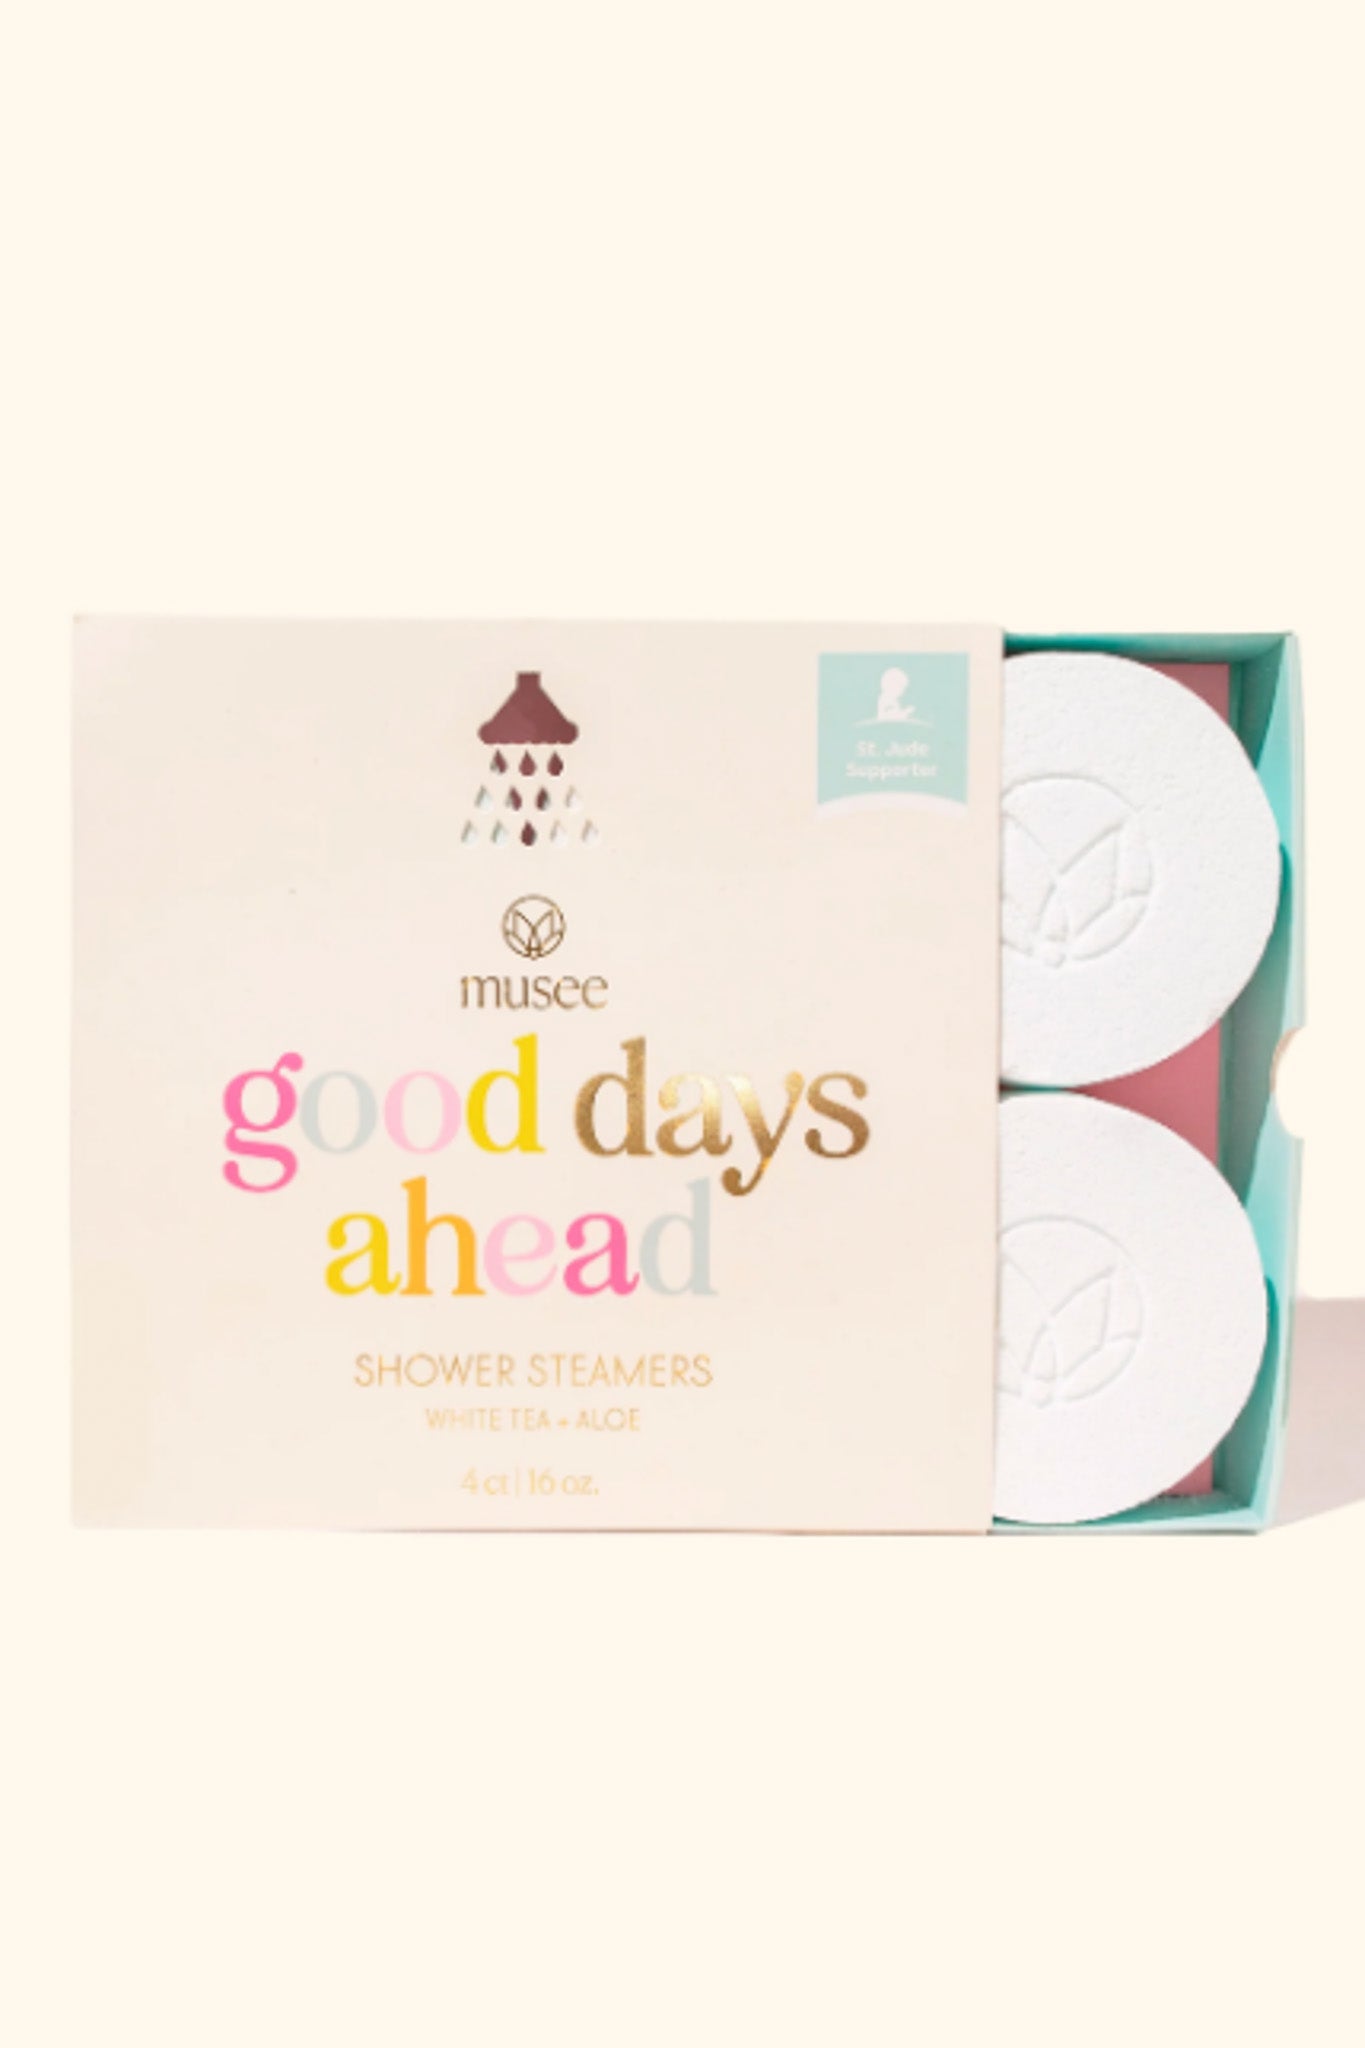 Good Days Ahead Shower Steamers (Case of 4)